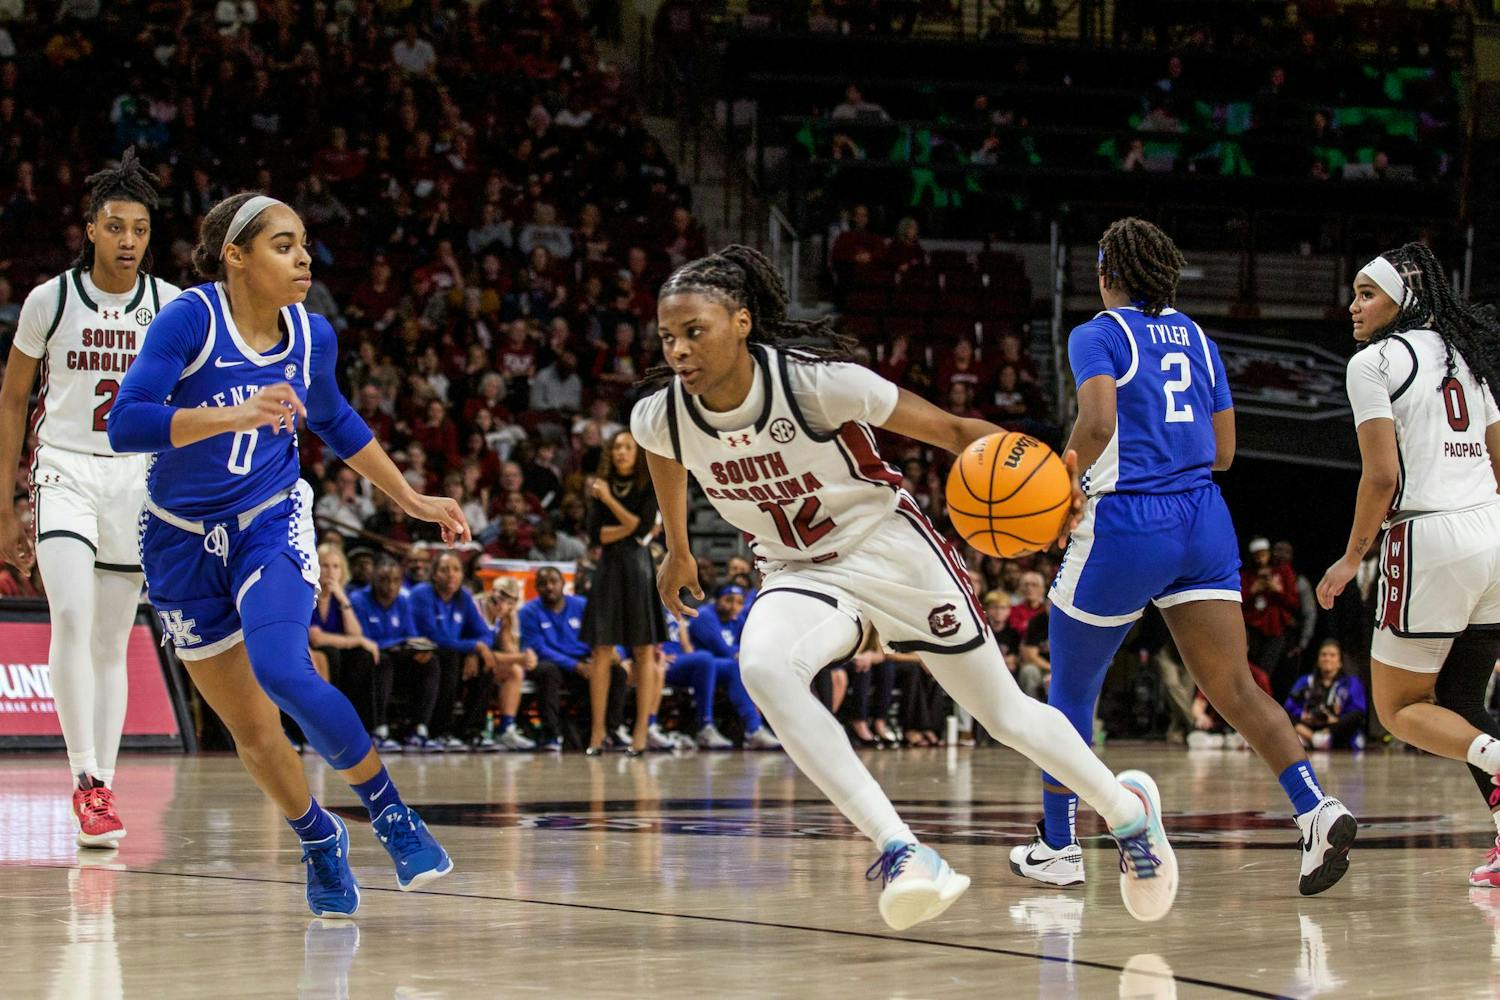 Freshman guard MiLaysia Fulwiley drives the ball against the Kentucky defense on Jan. 15, 2024 at Colonial Life Arena. Fulwiley contributed 14 points to the ɫɫƵs 98-36 victory against the Wildcats.